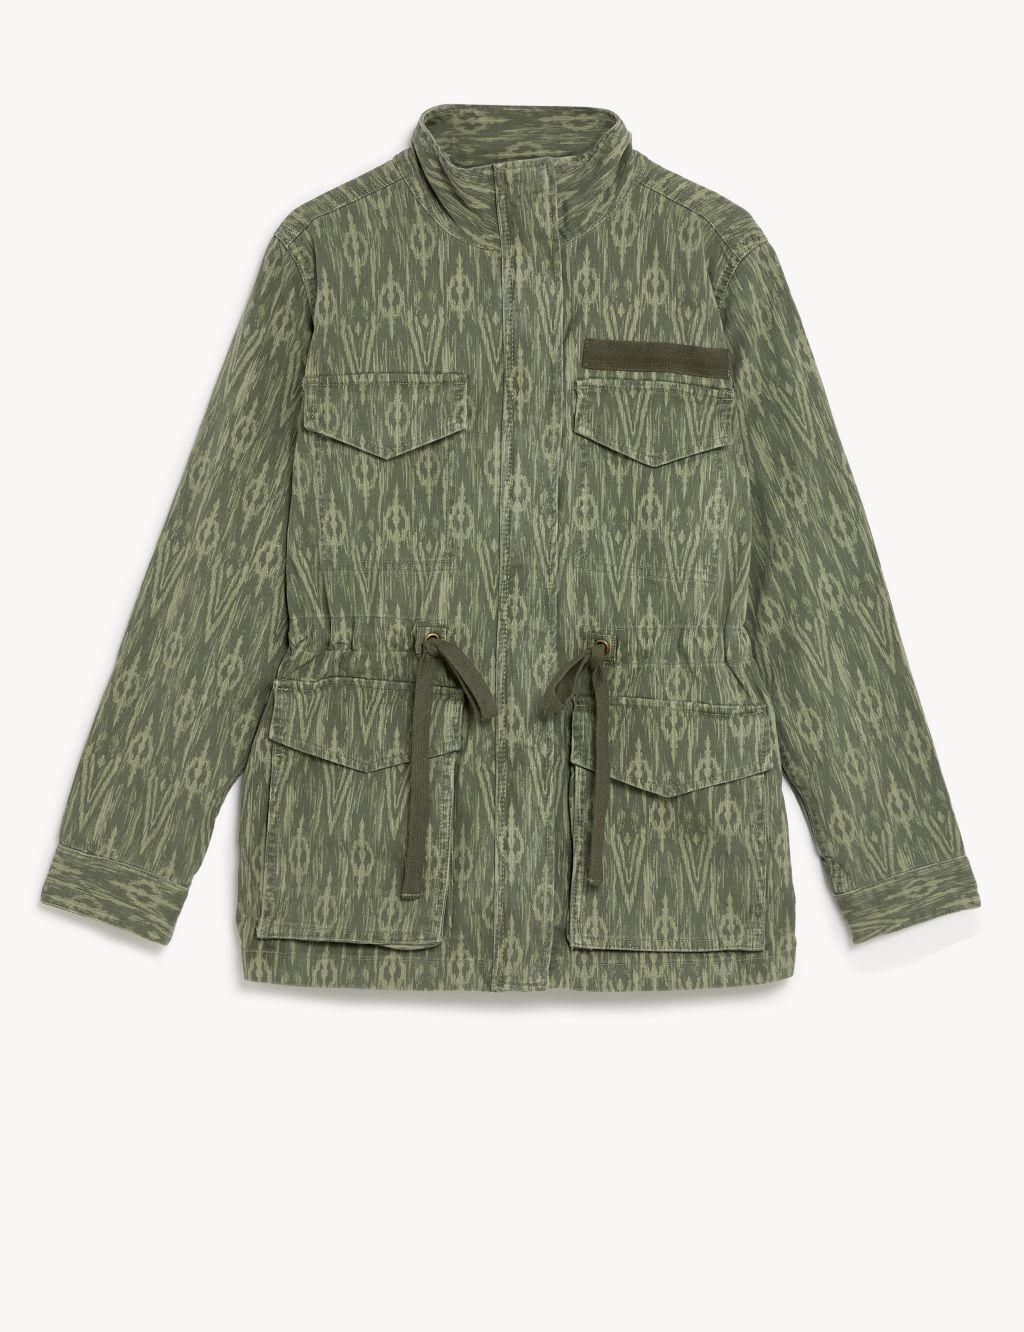 Cotton Rich Printed Utility Jacket image 2